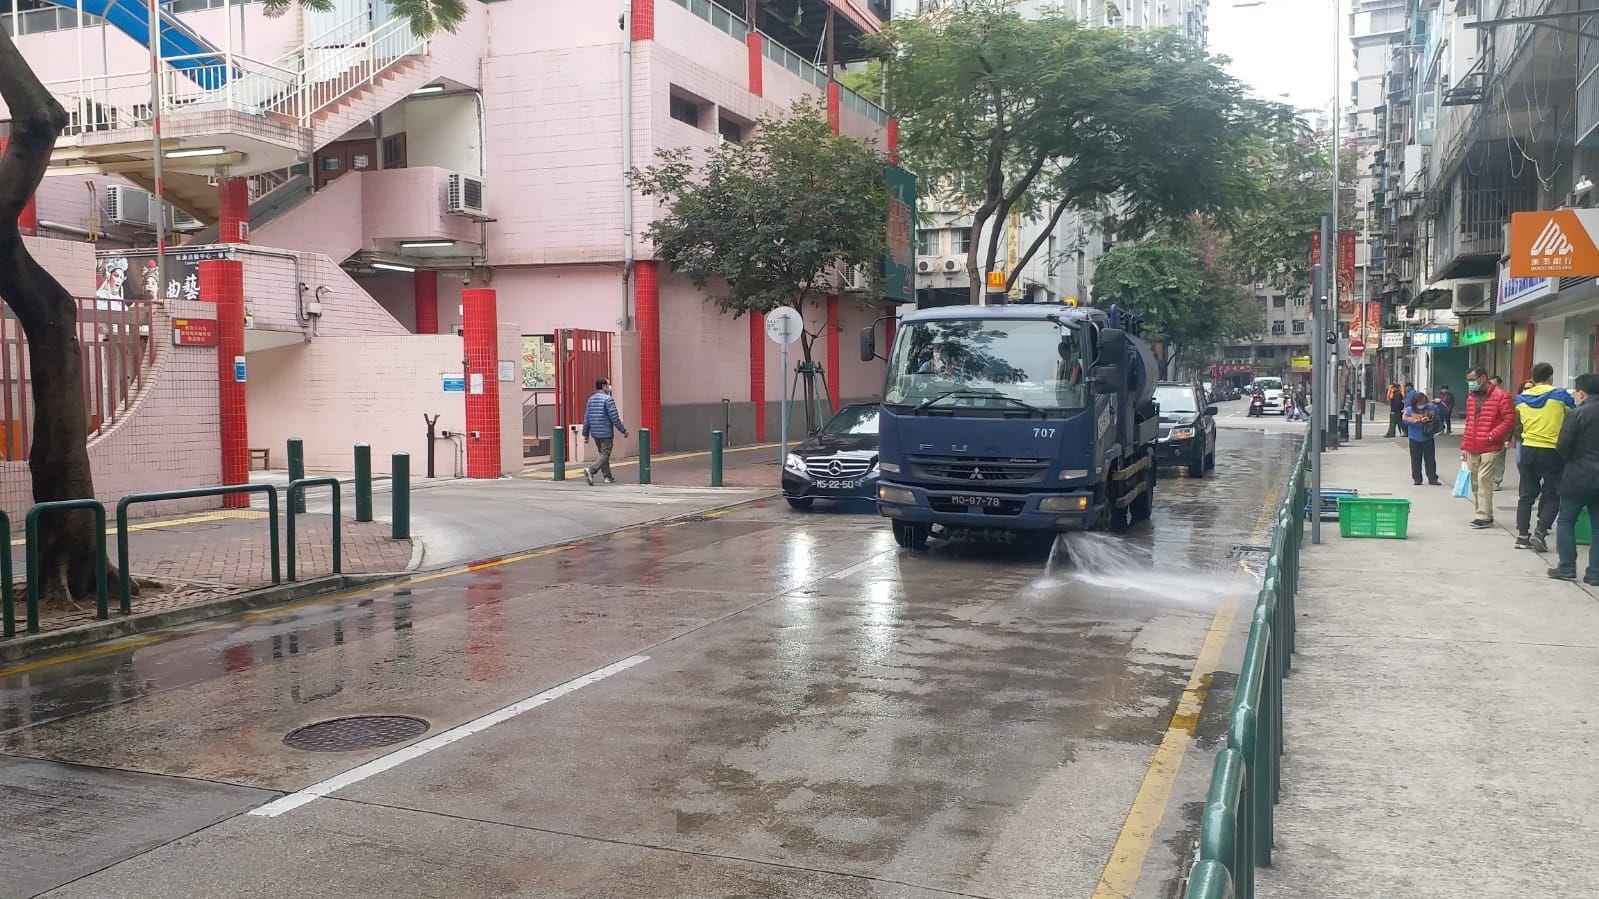 Government bolsters street cleaning to help fight coronavirus